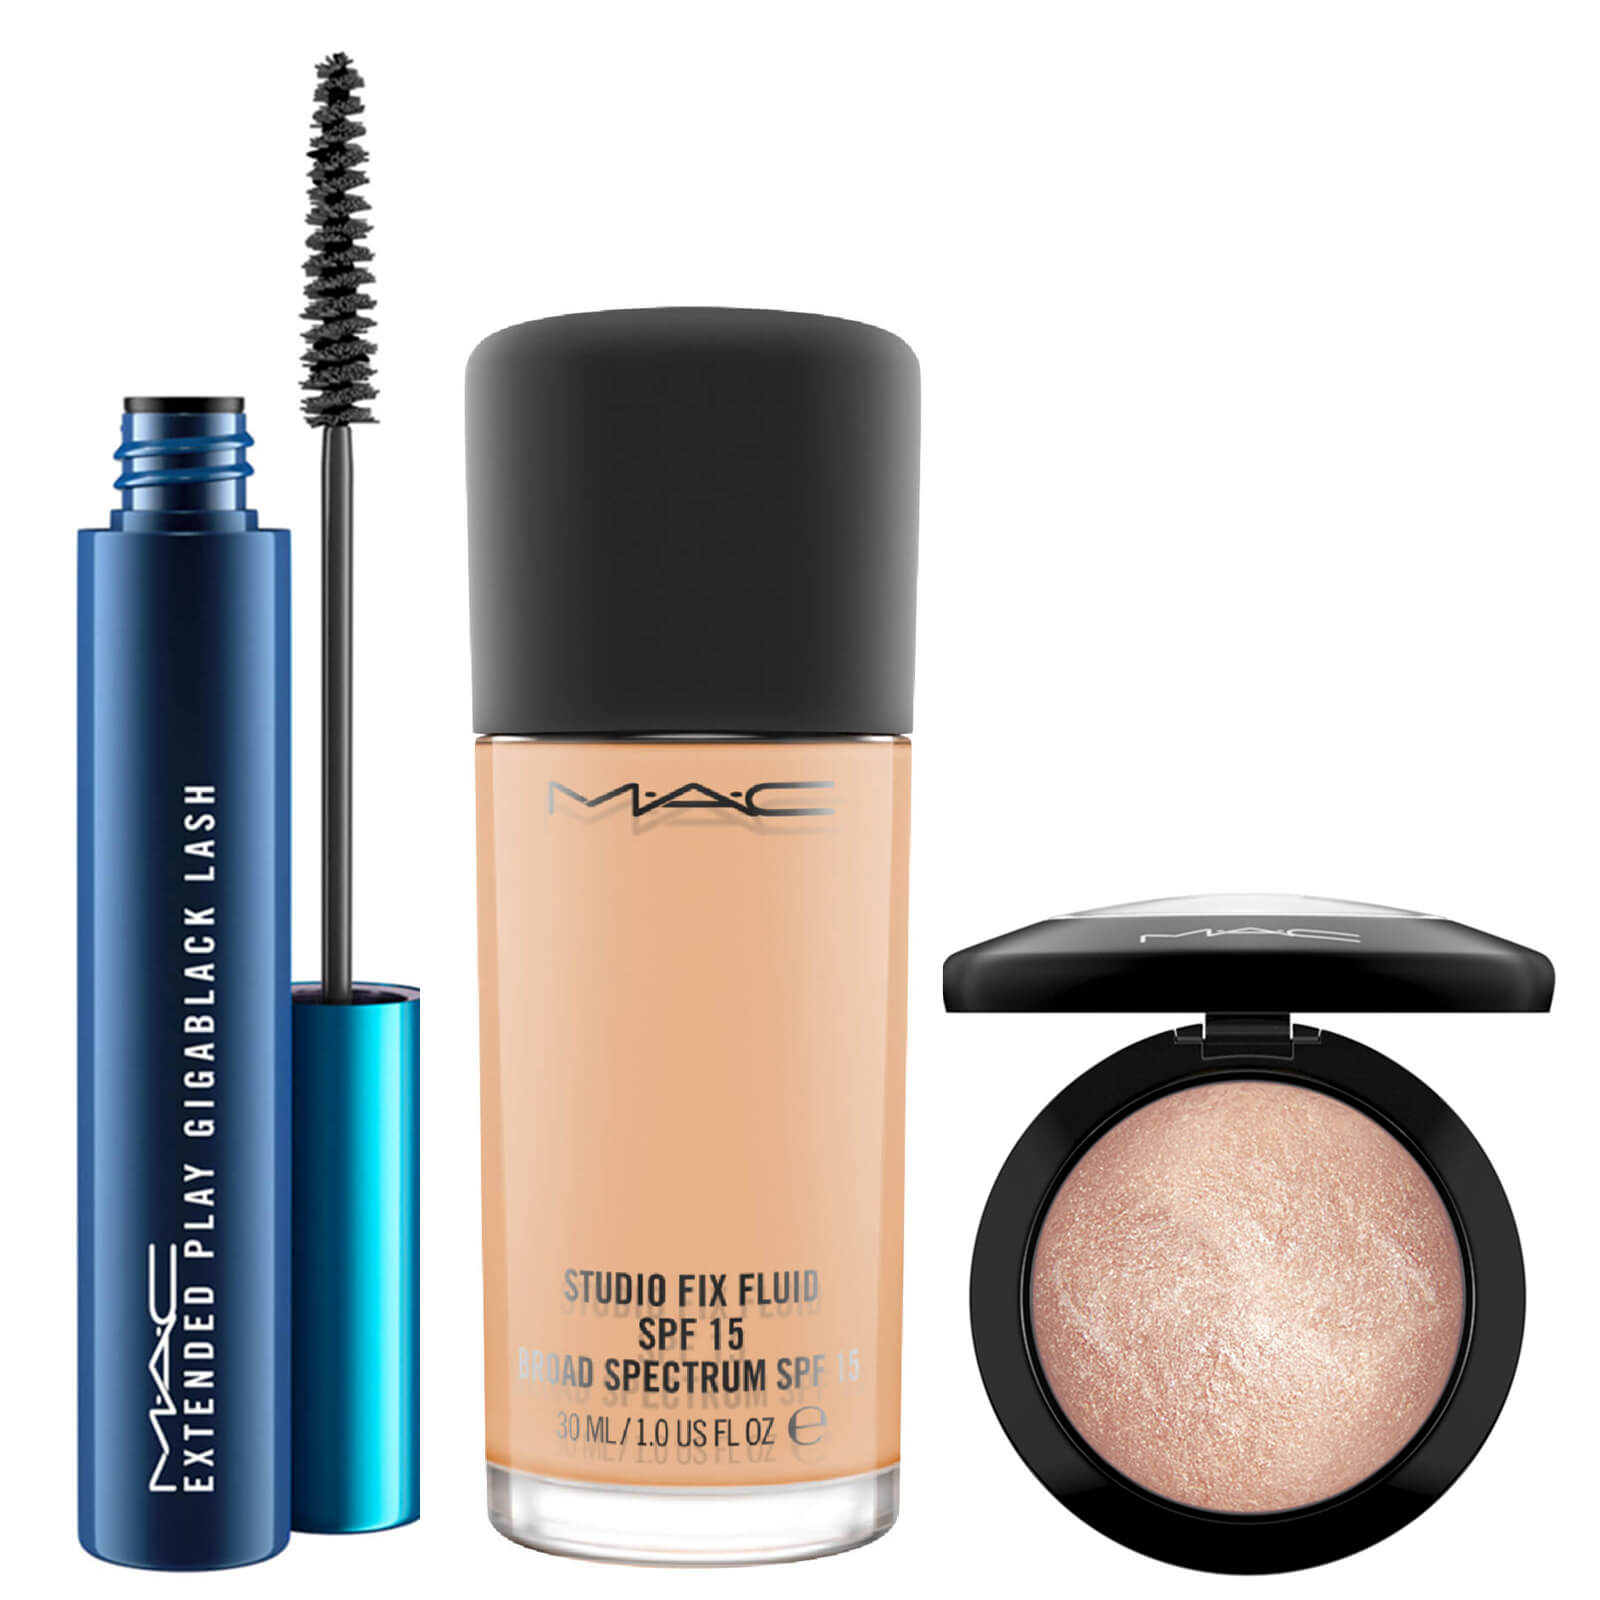 M·A·C Bestsellers Kit (Various Shades) - NW22